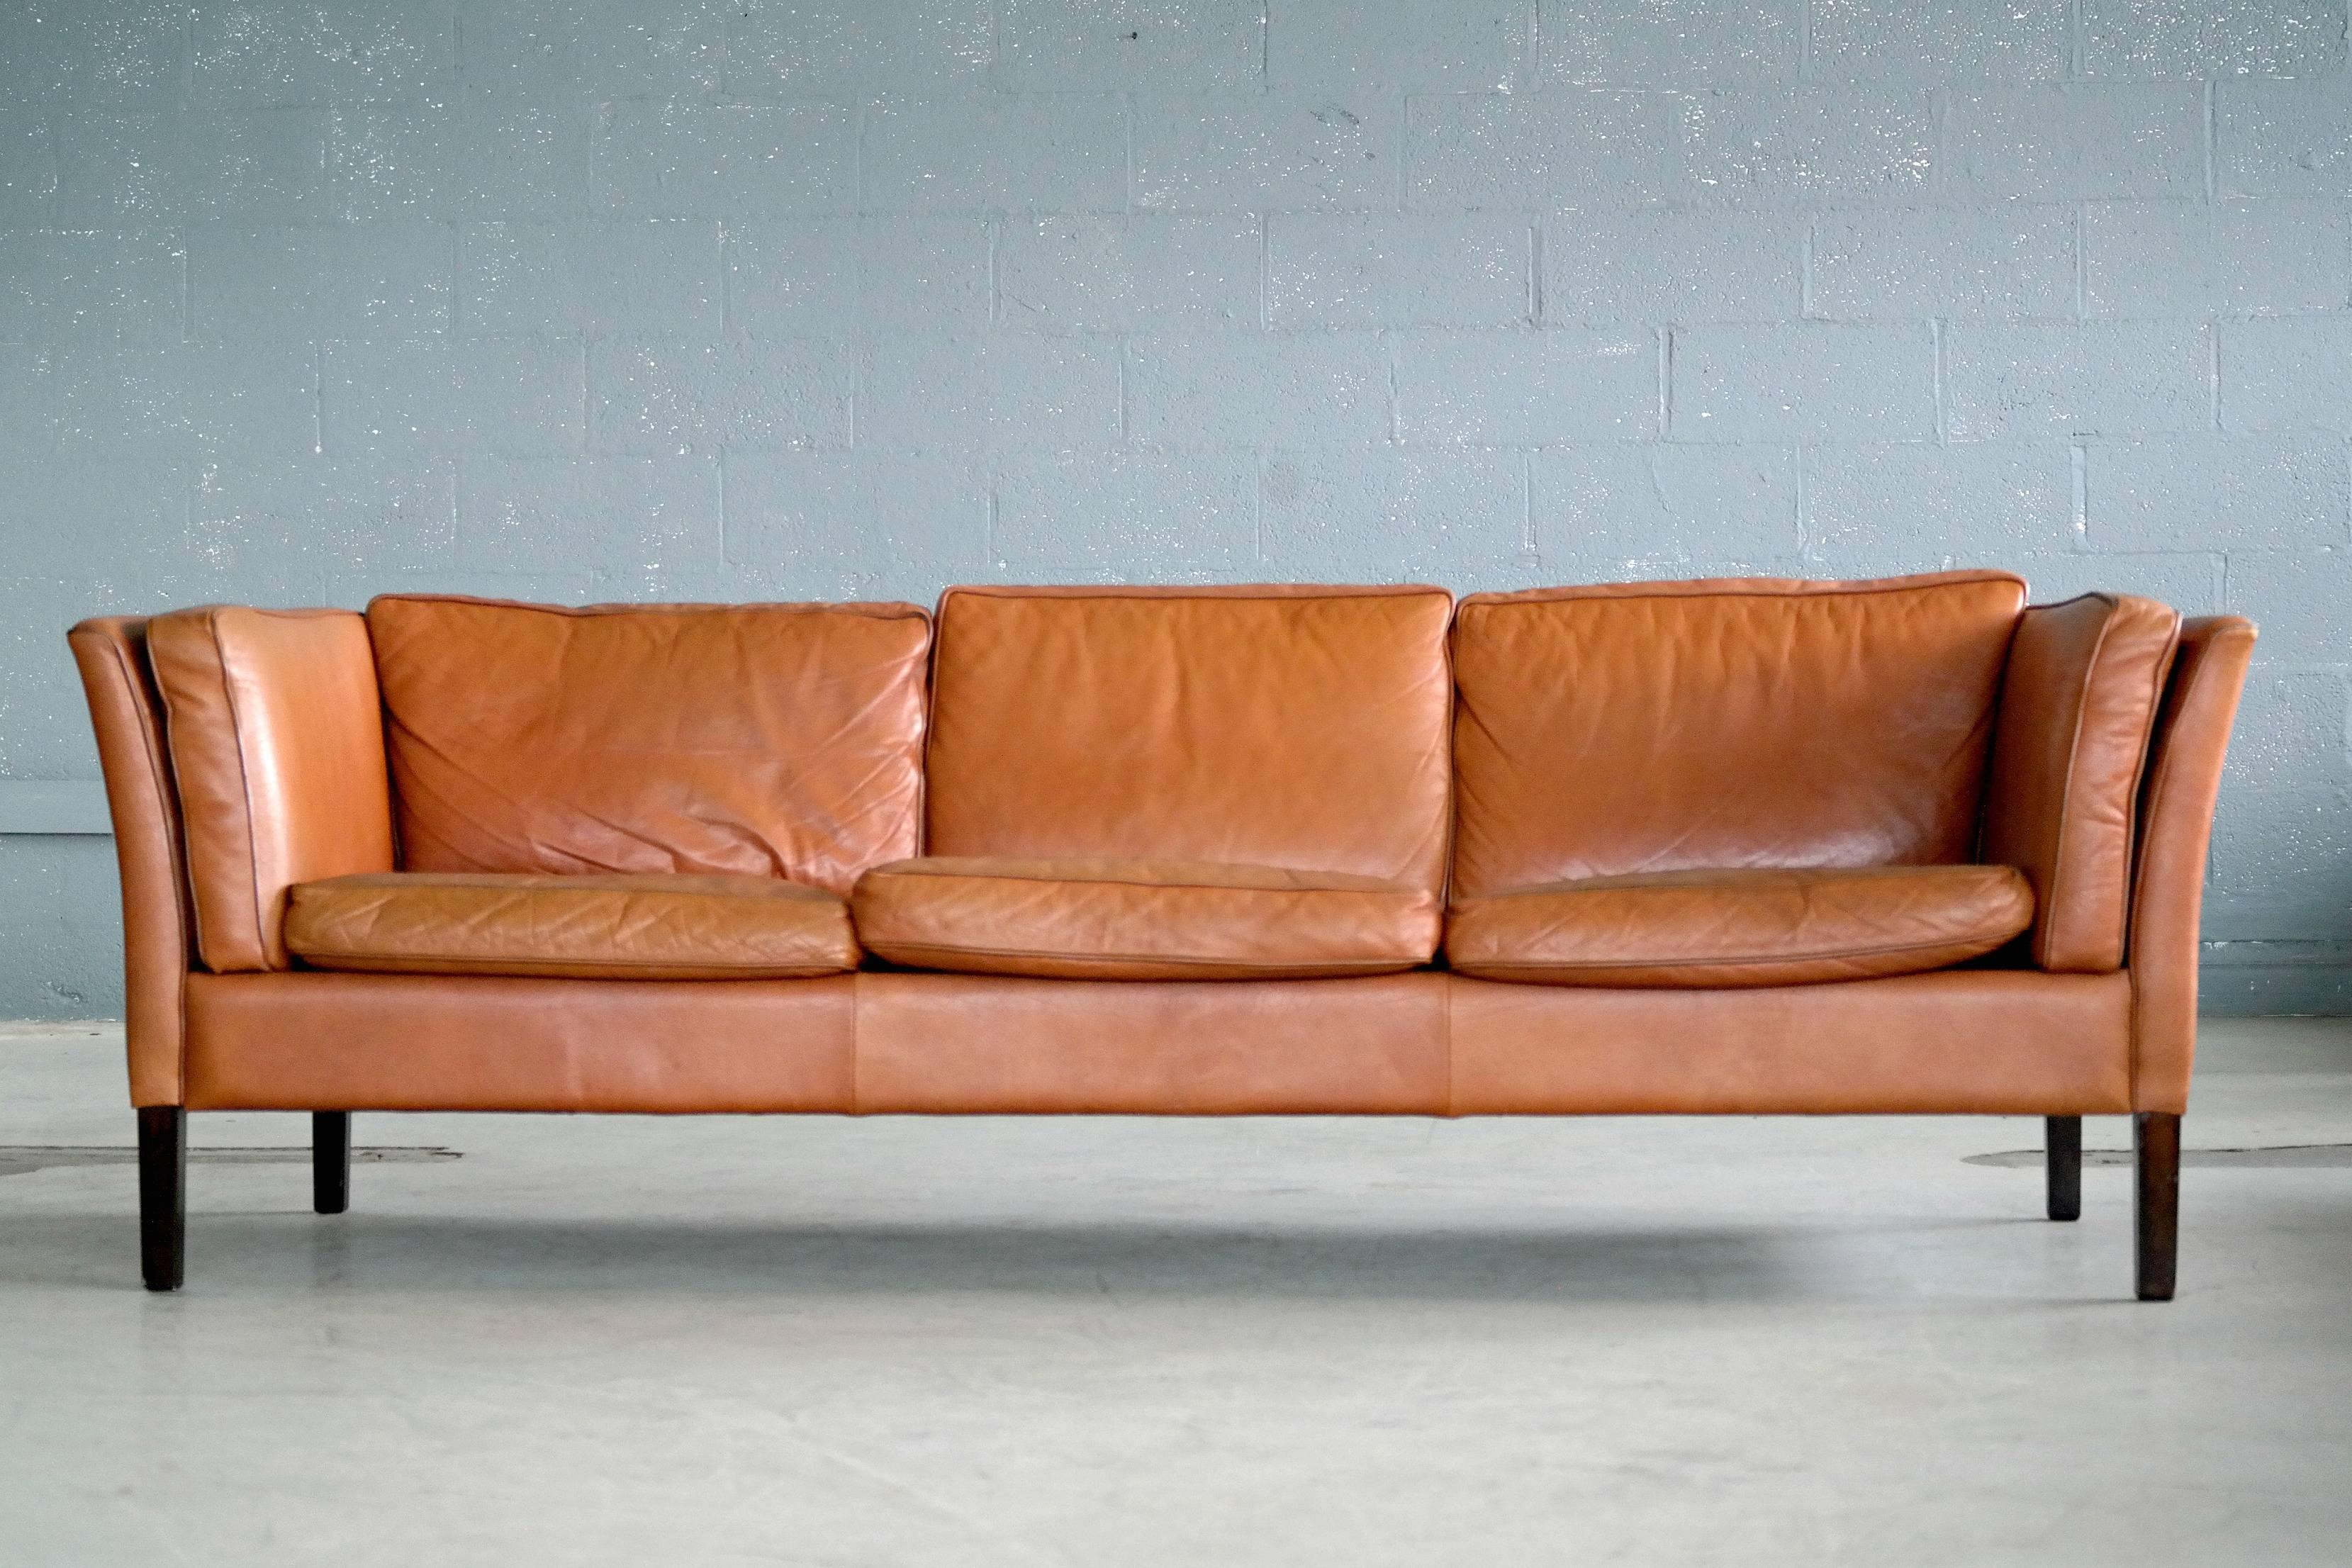 Stunning classic Borge Mogensen style three-seat sofa in supple soft patinated cognac colored leather raised on stained beechwood legs made by Stouby Mobler. Late 1960s design but probably manufactured in the 1970s. Very high build quality that